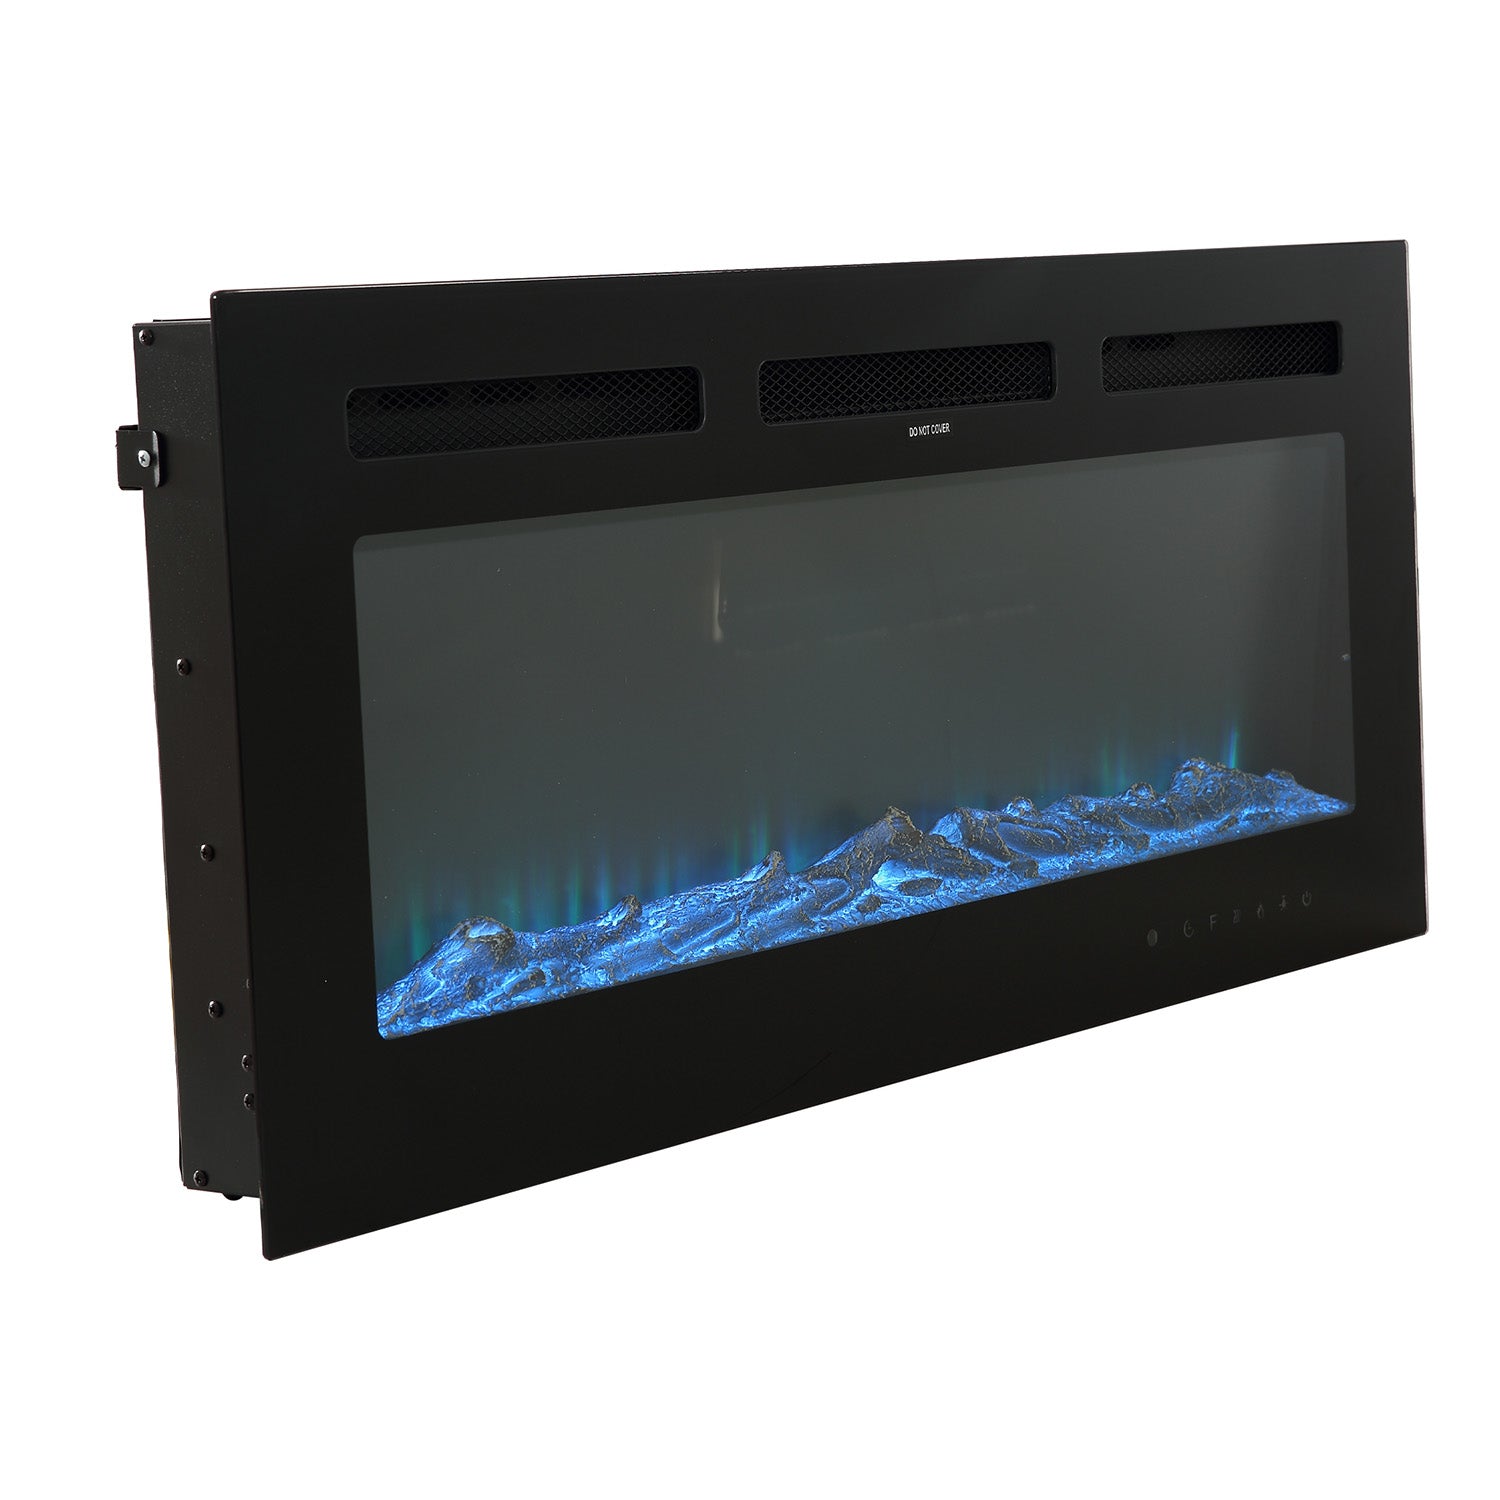 Boyel Living Electric Wall Mounted Recessed Fireplace with Remote 1500/750 Watt in Black, 30/36/40/50/60 in.-Boyel Living